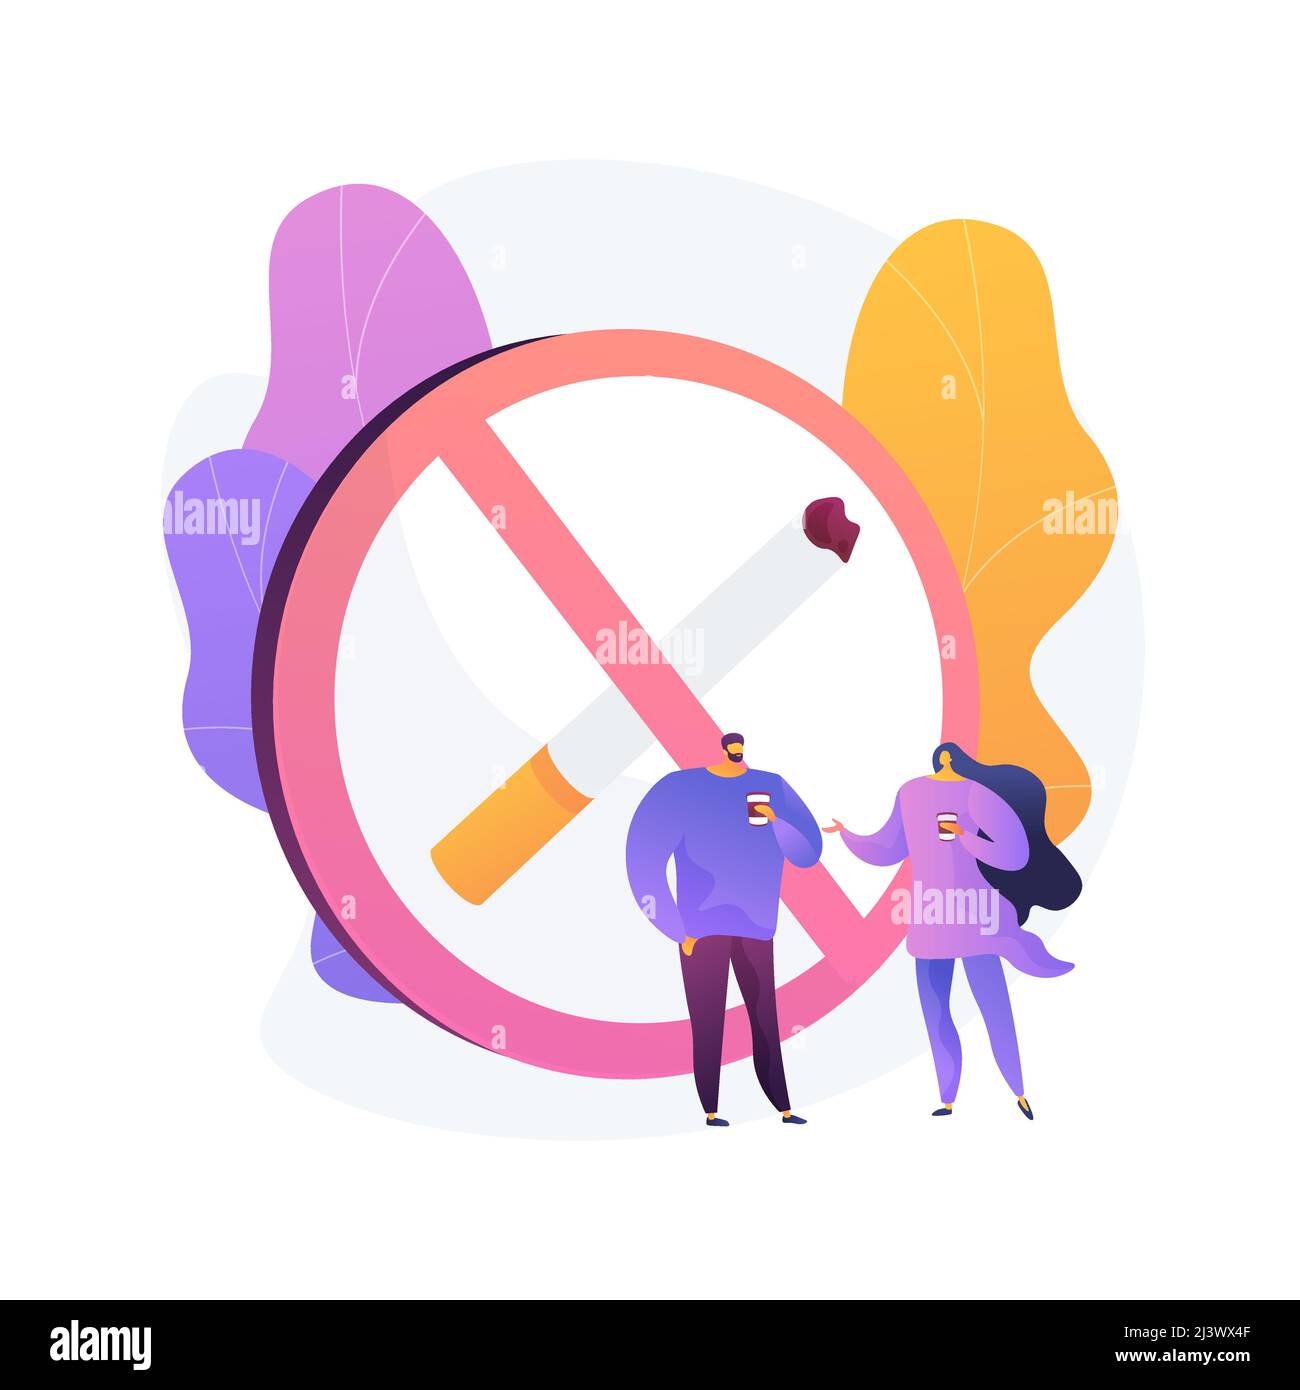 Smoke free zone sign. No smoking area, public space prohibition, warning symbol. People drinking coffee in smoke free location. Cigarette banned notic Stock Vector